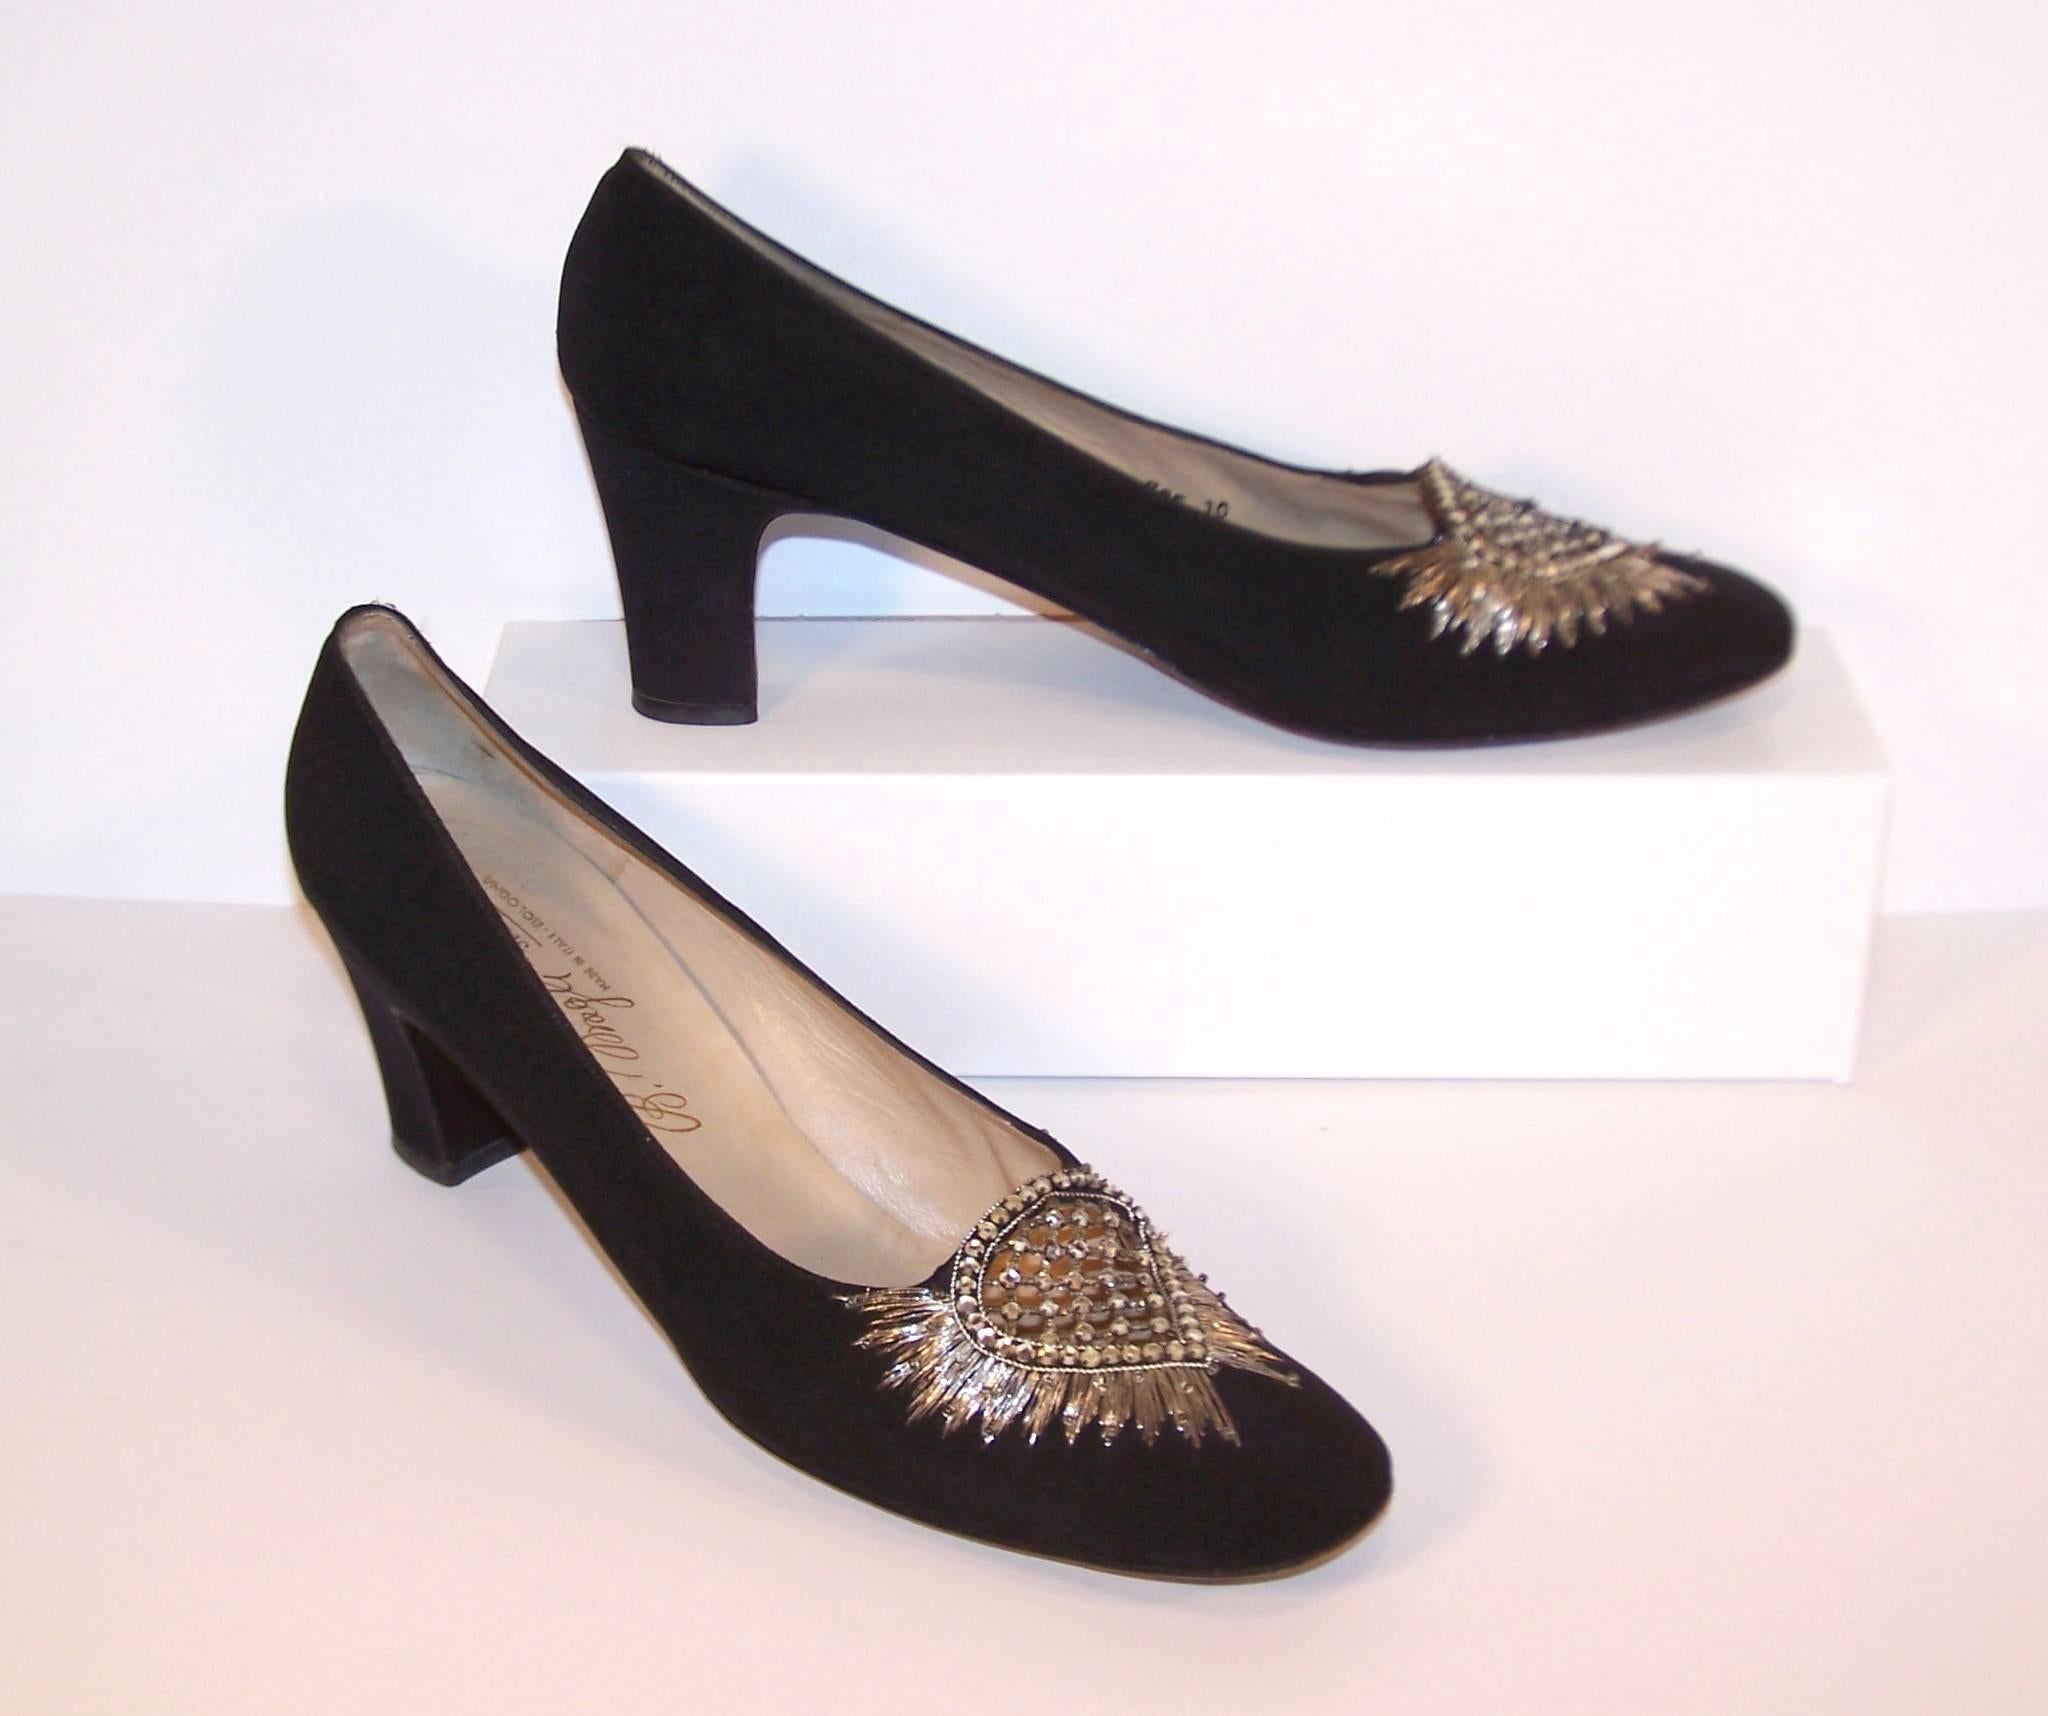 Fit for a queen!  These 1960's Bruno Magli evening shoes are a black silk faille fabric with metallic silver embroidery, beads and sparkling rhinestones at the vamp.  They are elegant and refined with an eye to craftsmanship...all hallmarks of the